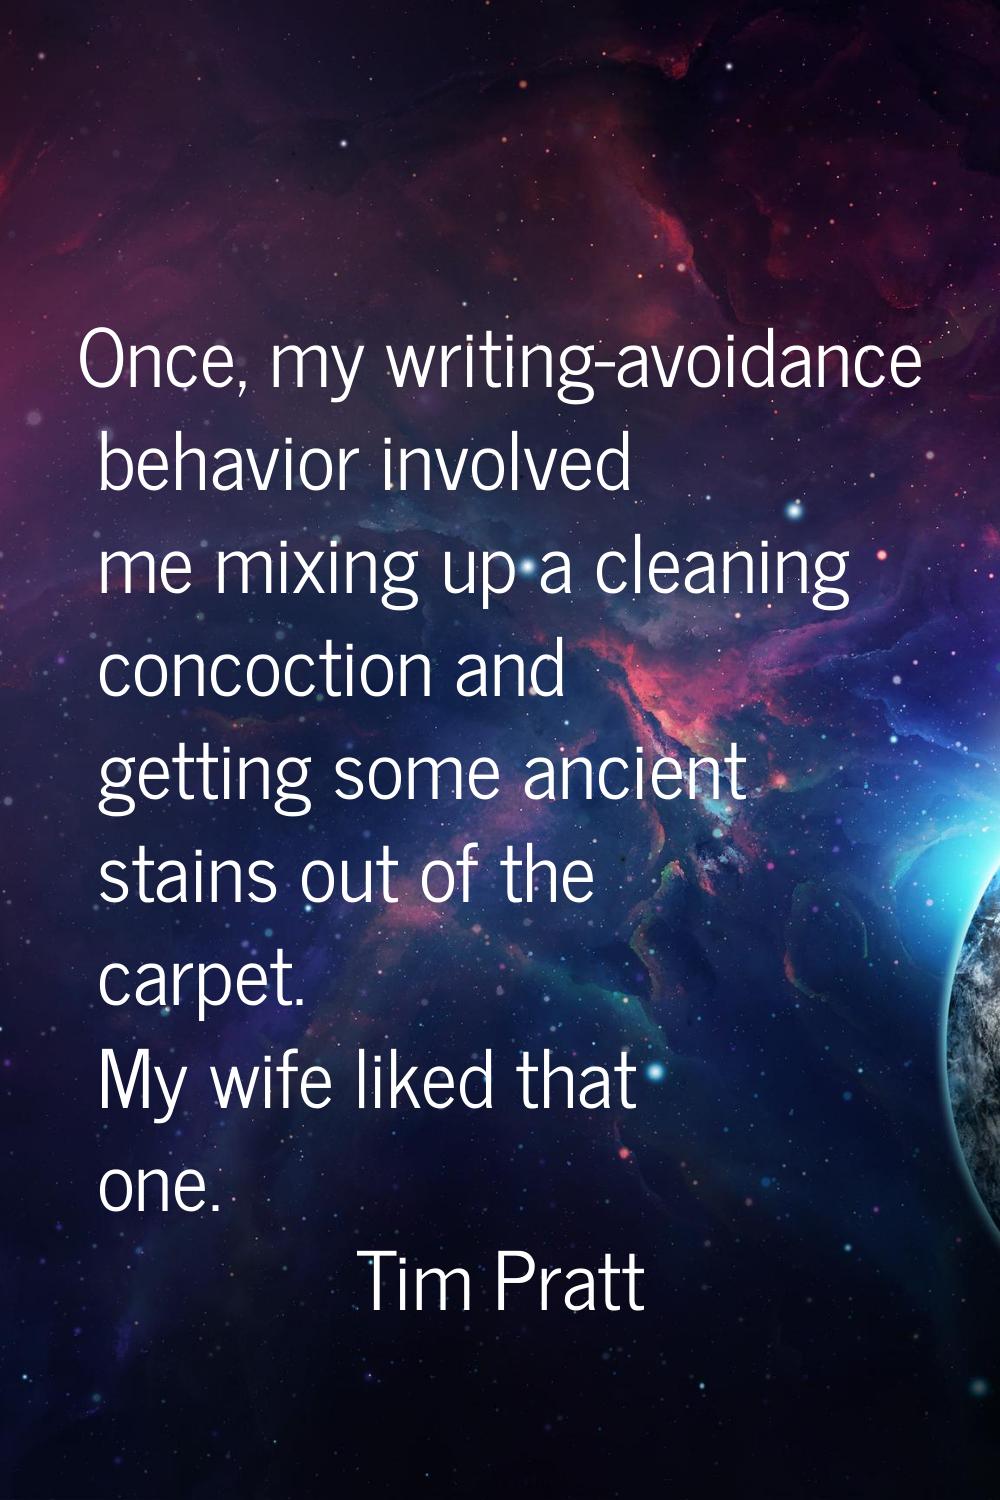 Once, my writing-avoidance behavior involved me mixing up a cleaning concoction and getting some an